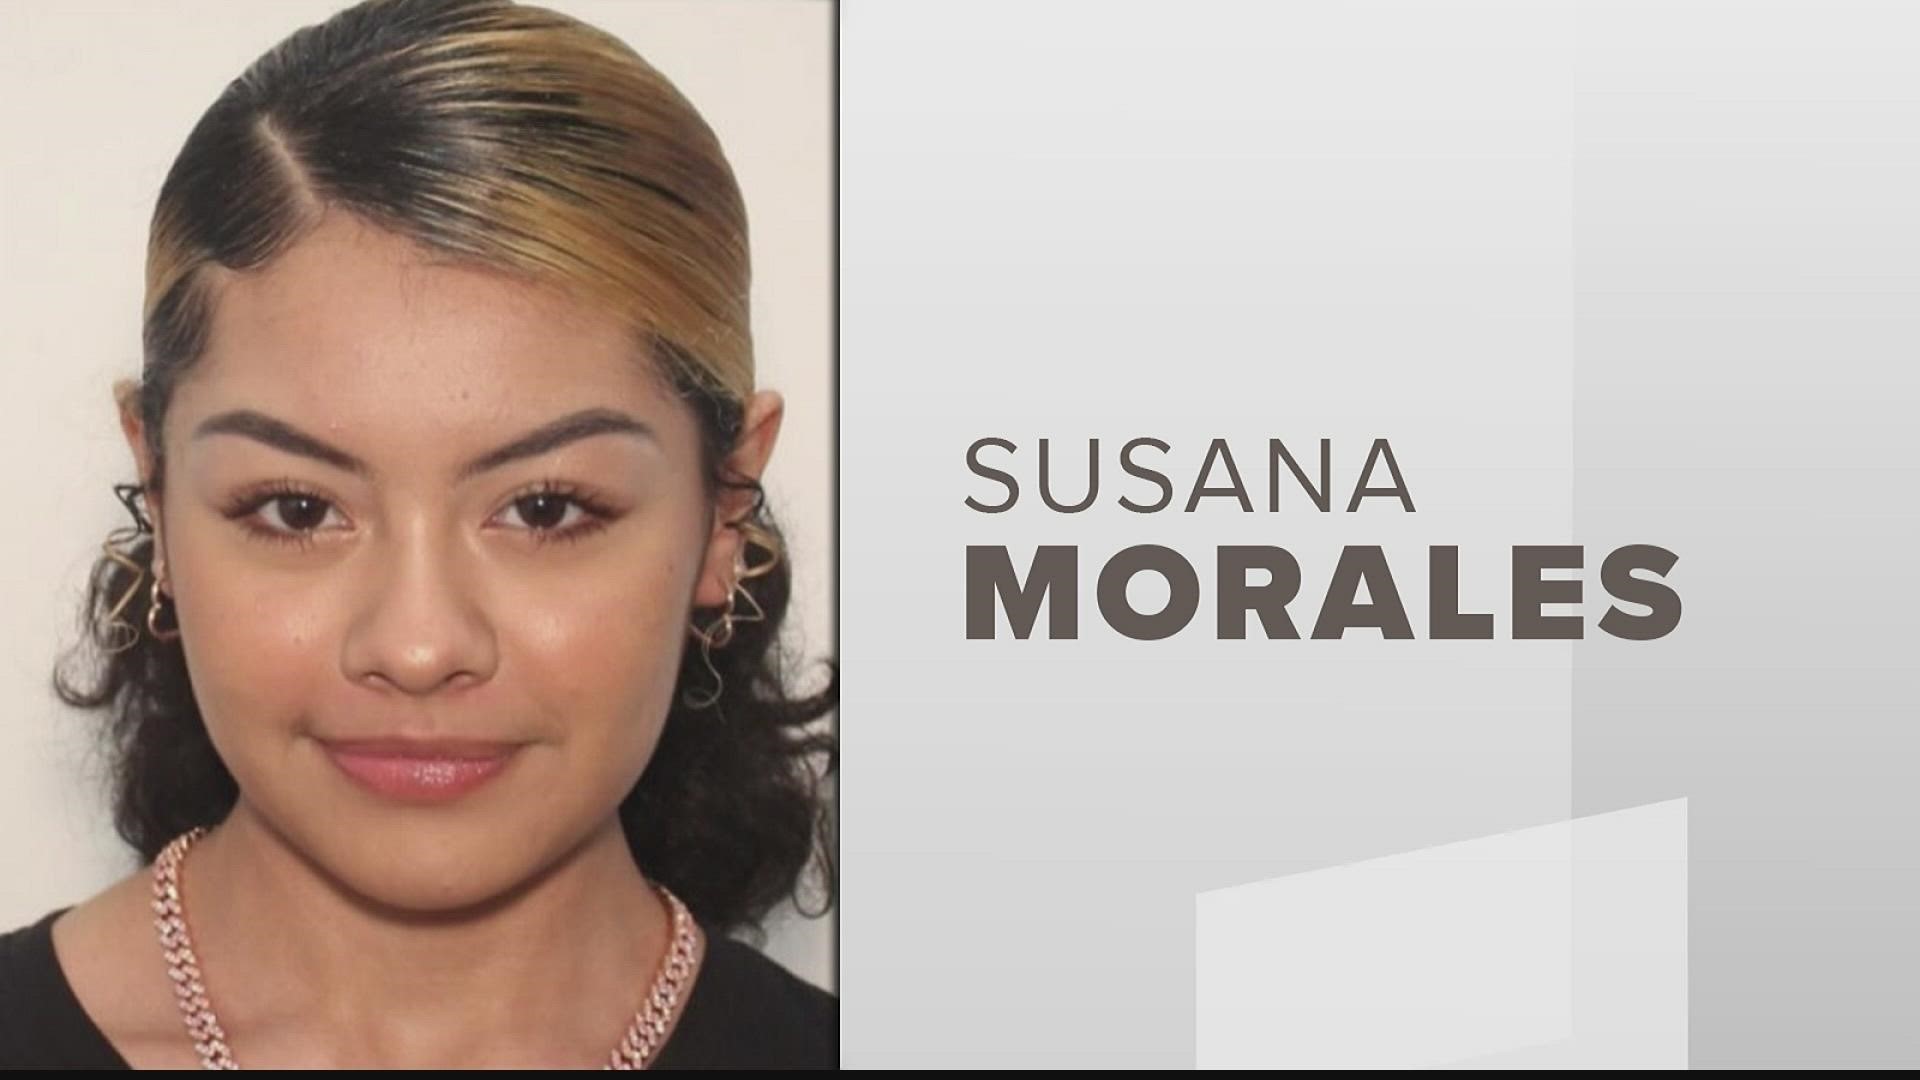 16-year-old Susana Morales was last seen by her family July 26.